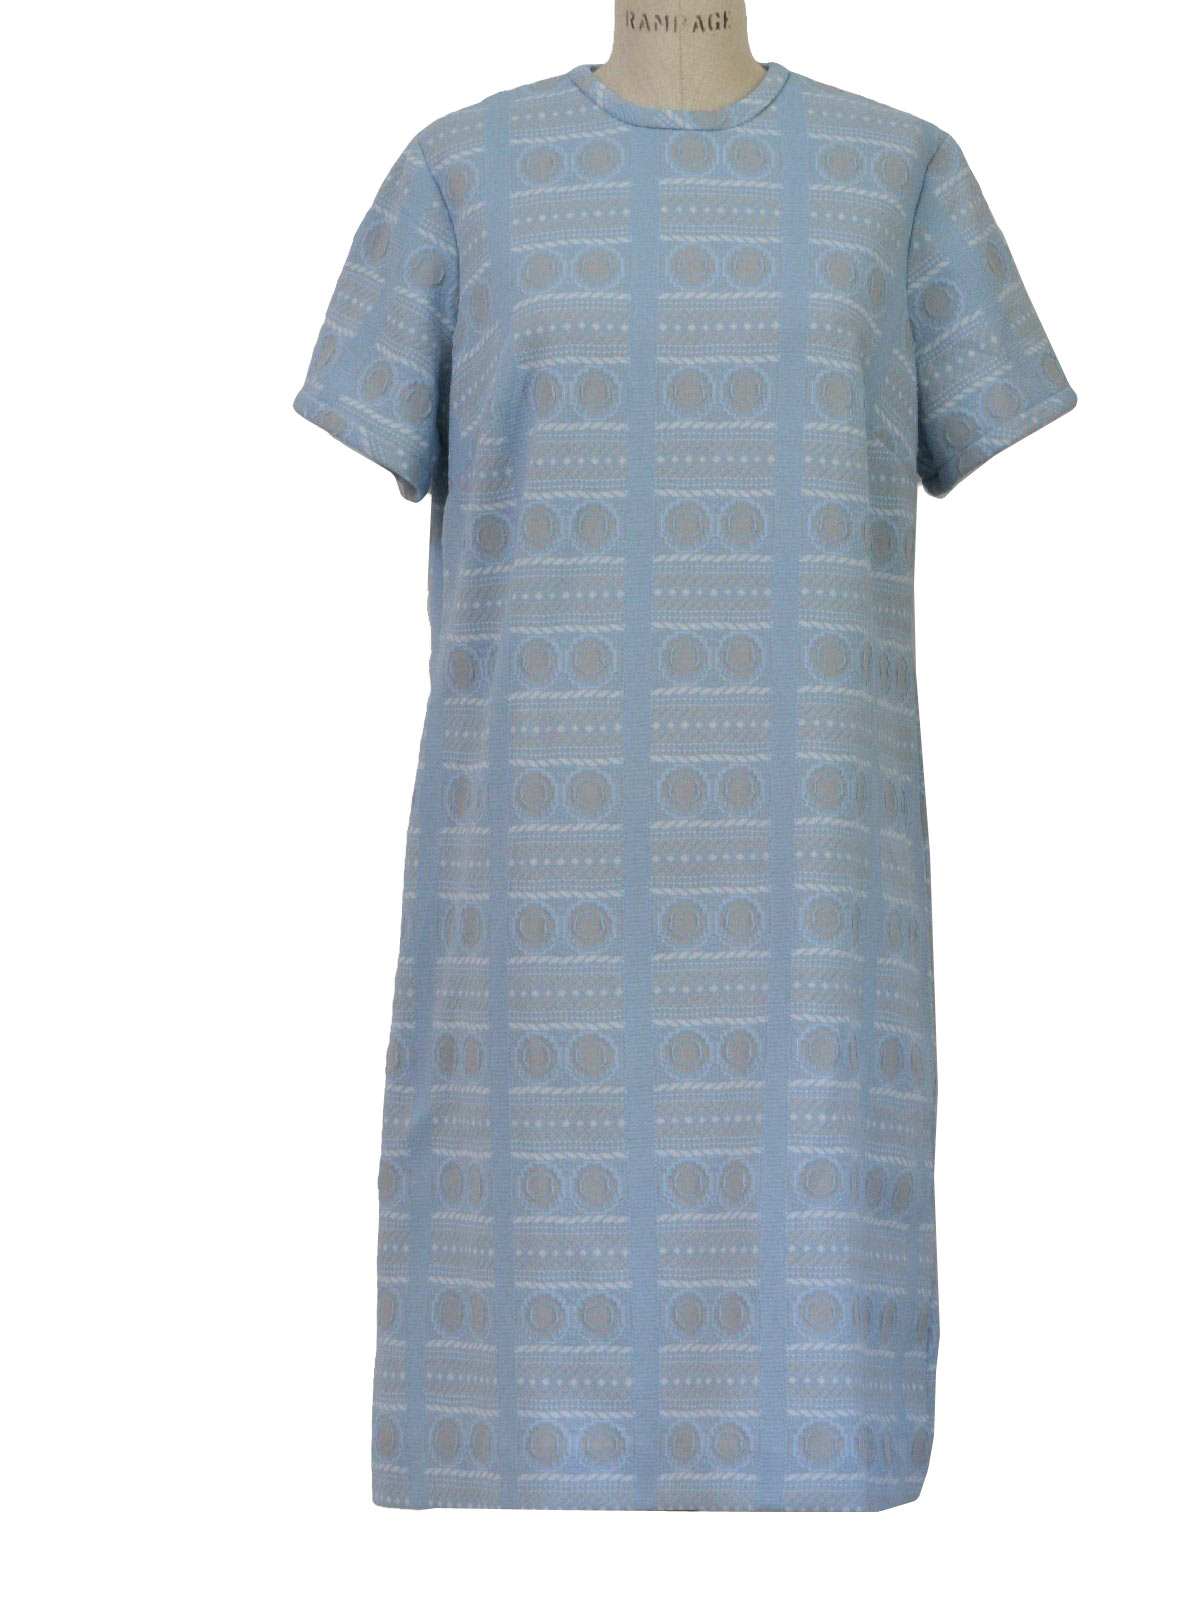 Vintage Seventies Dress: 70s -no label- Womens light blue, grey and ...